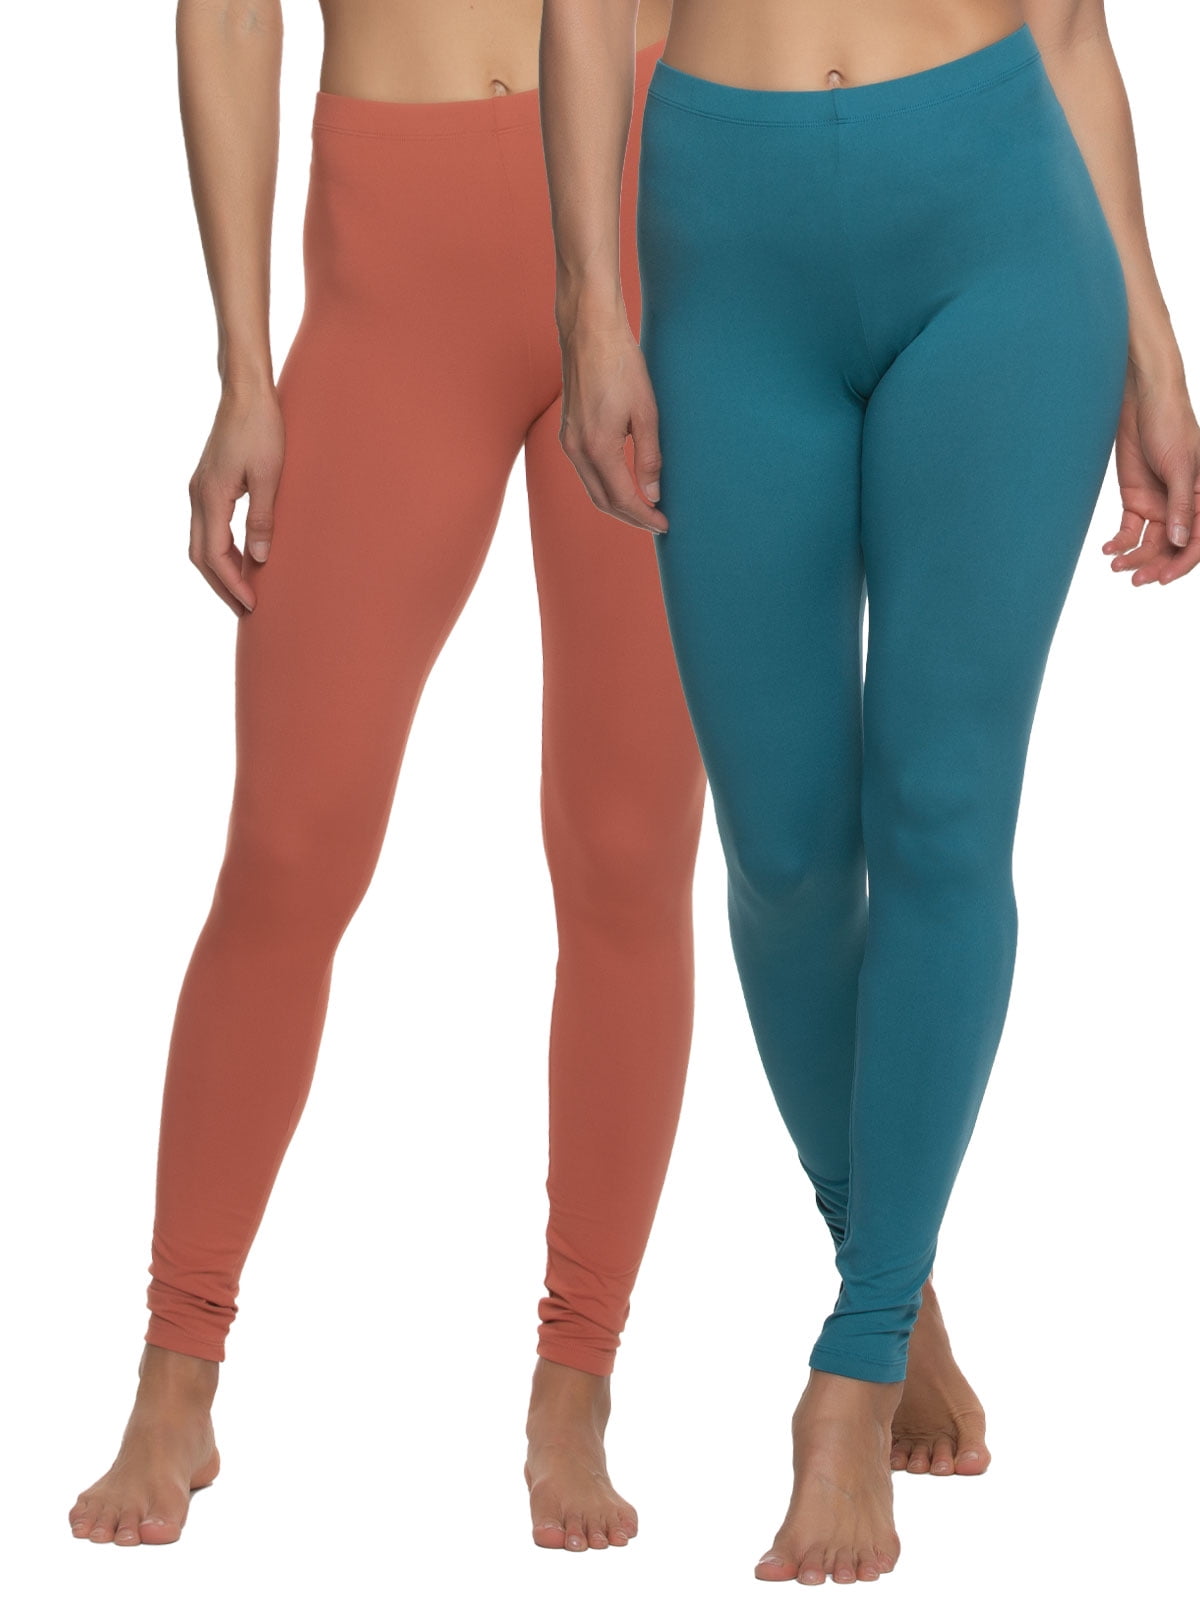 Felina Velvety Super Soft Lightweight Leggings 2-Pack - For Women - Yoga  Pants, Workout Clothes (Warm Beach, X-Small)